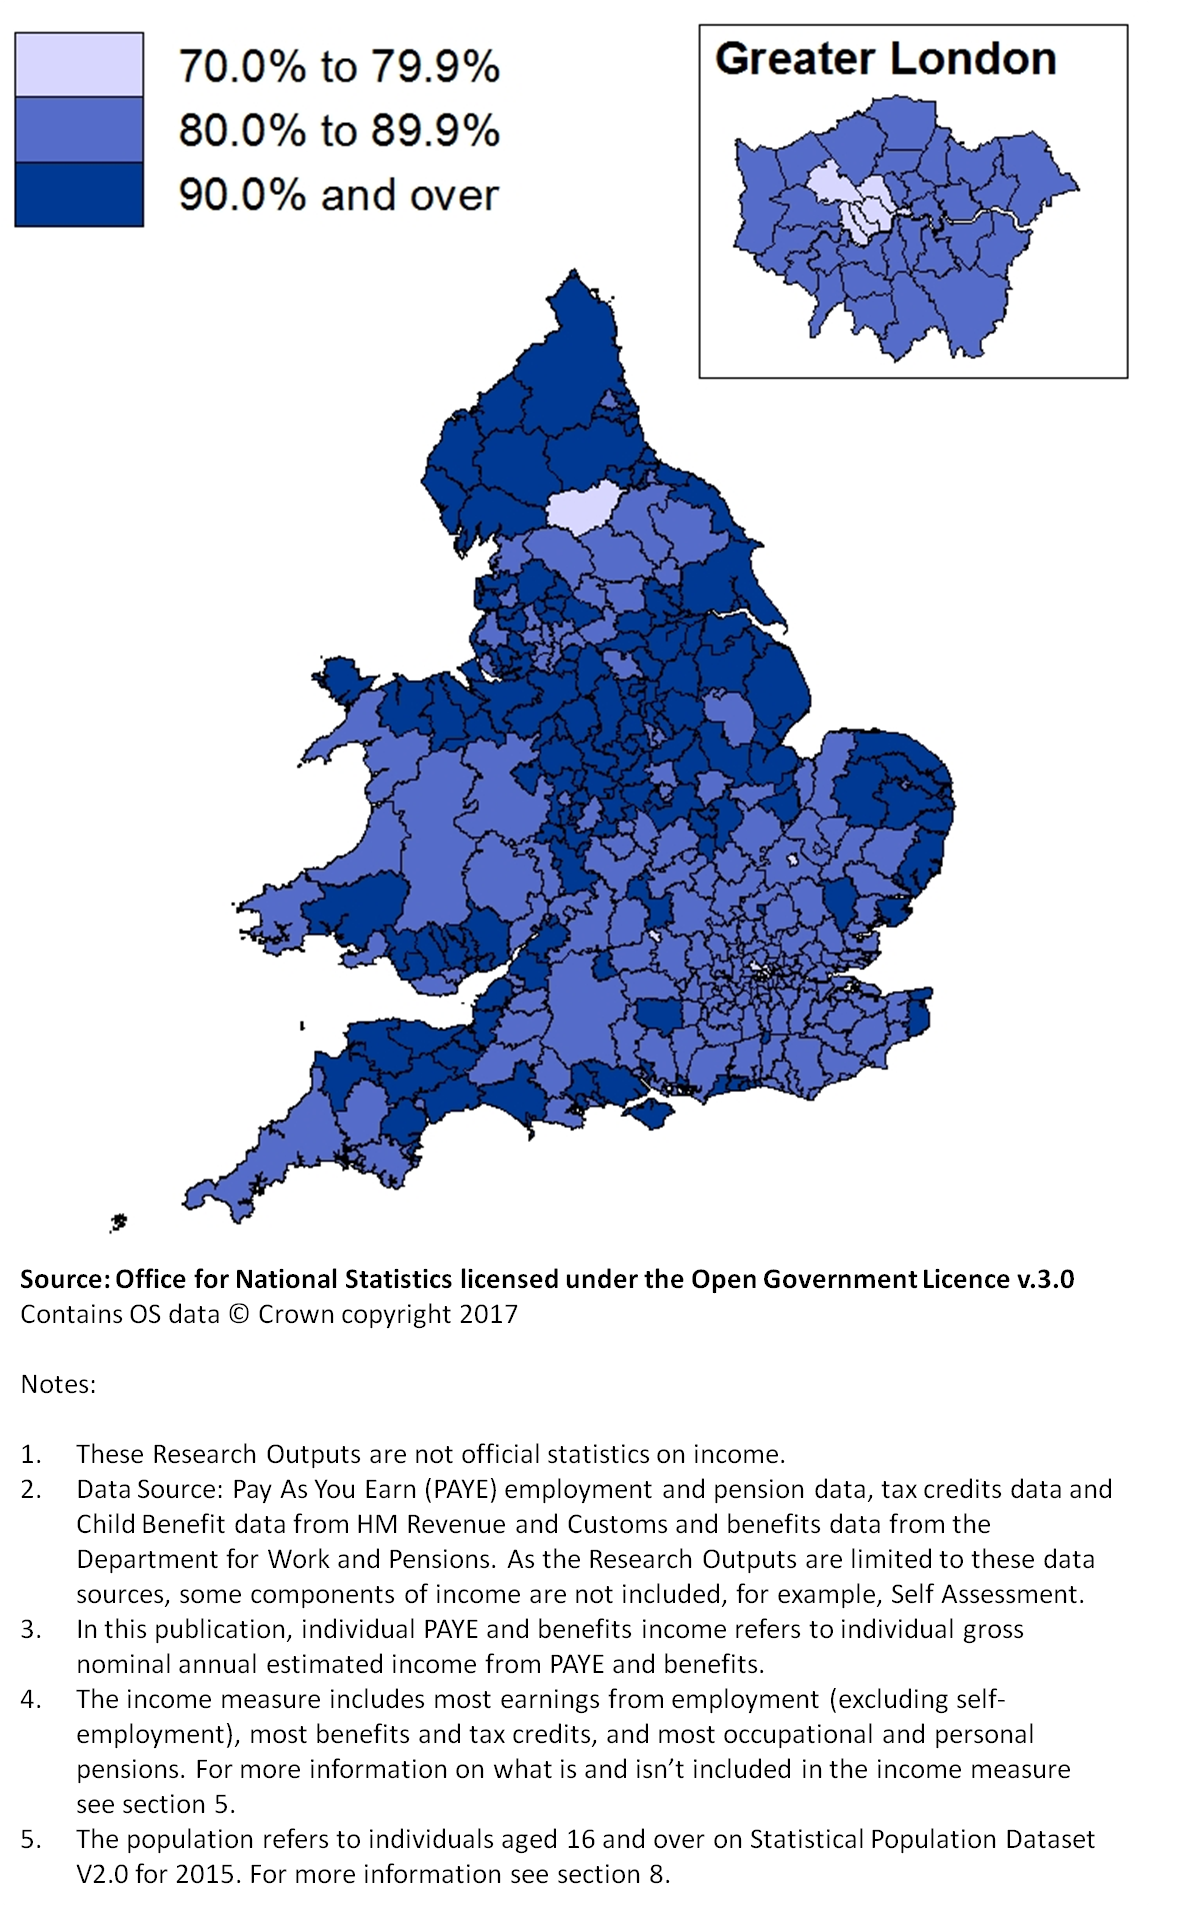 All local authorities had some income information available for at least 70% of their population.